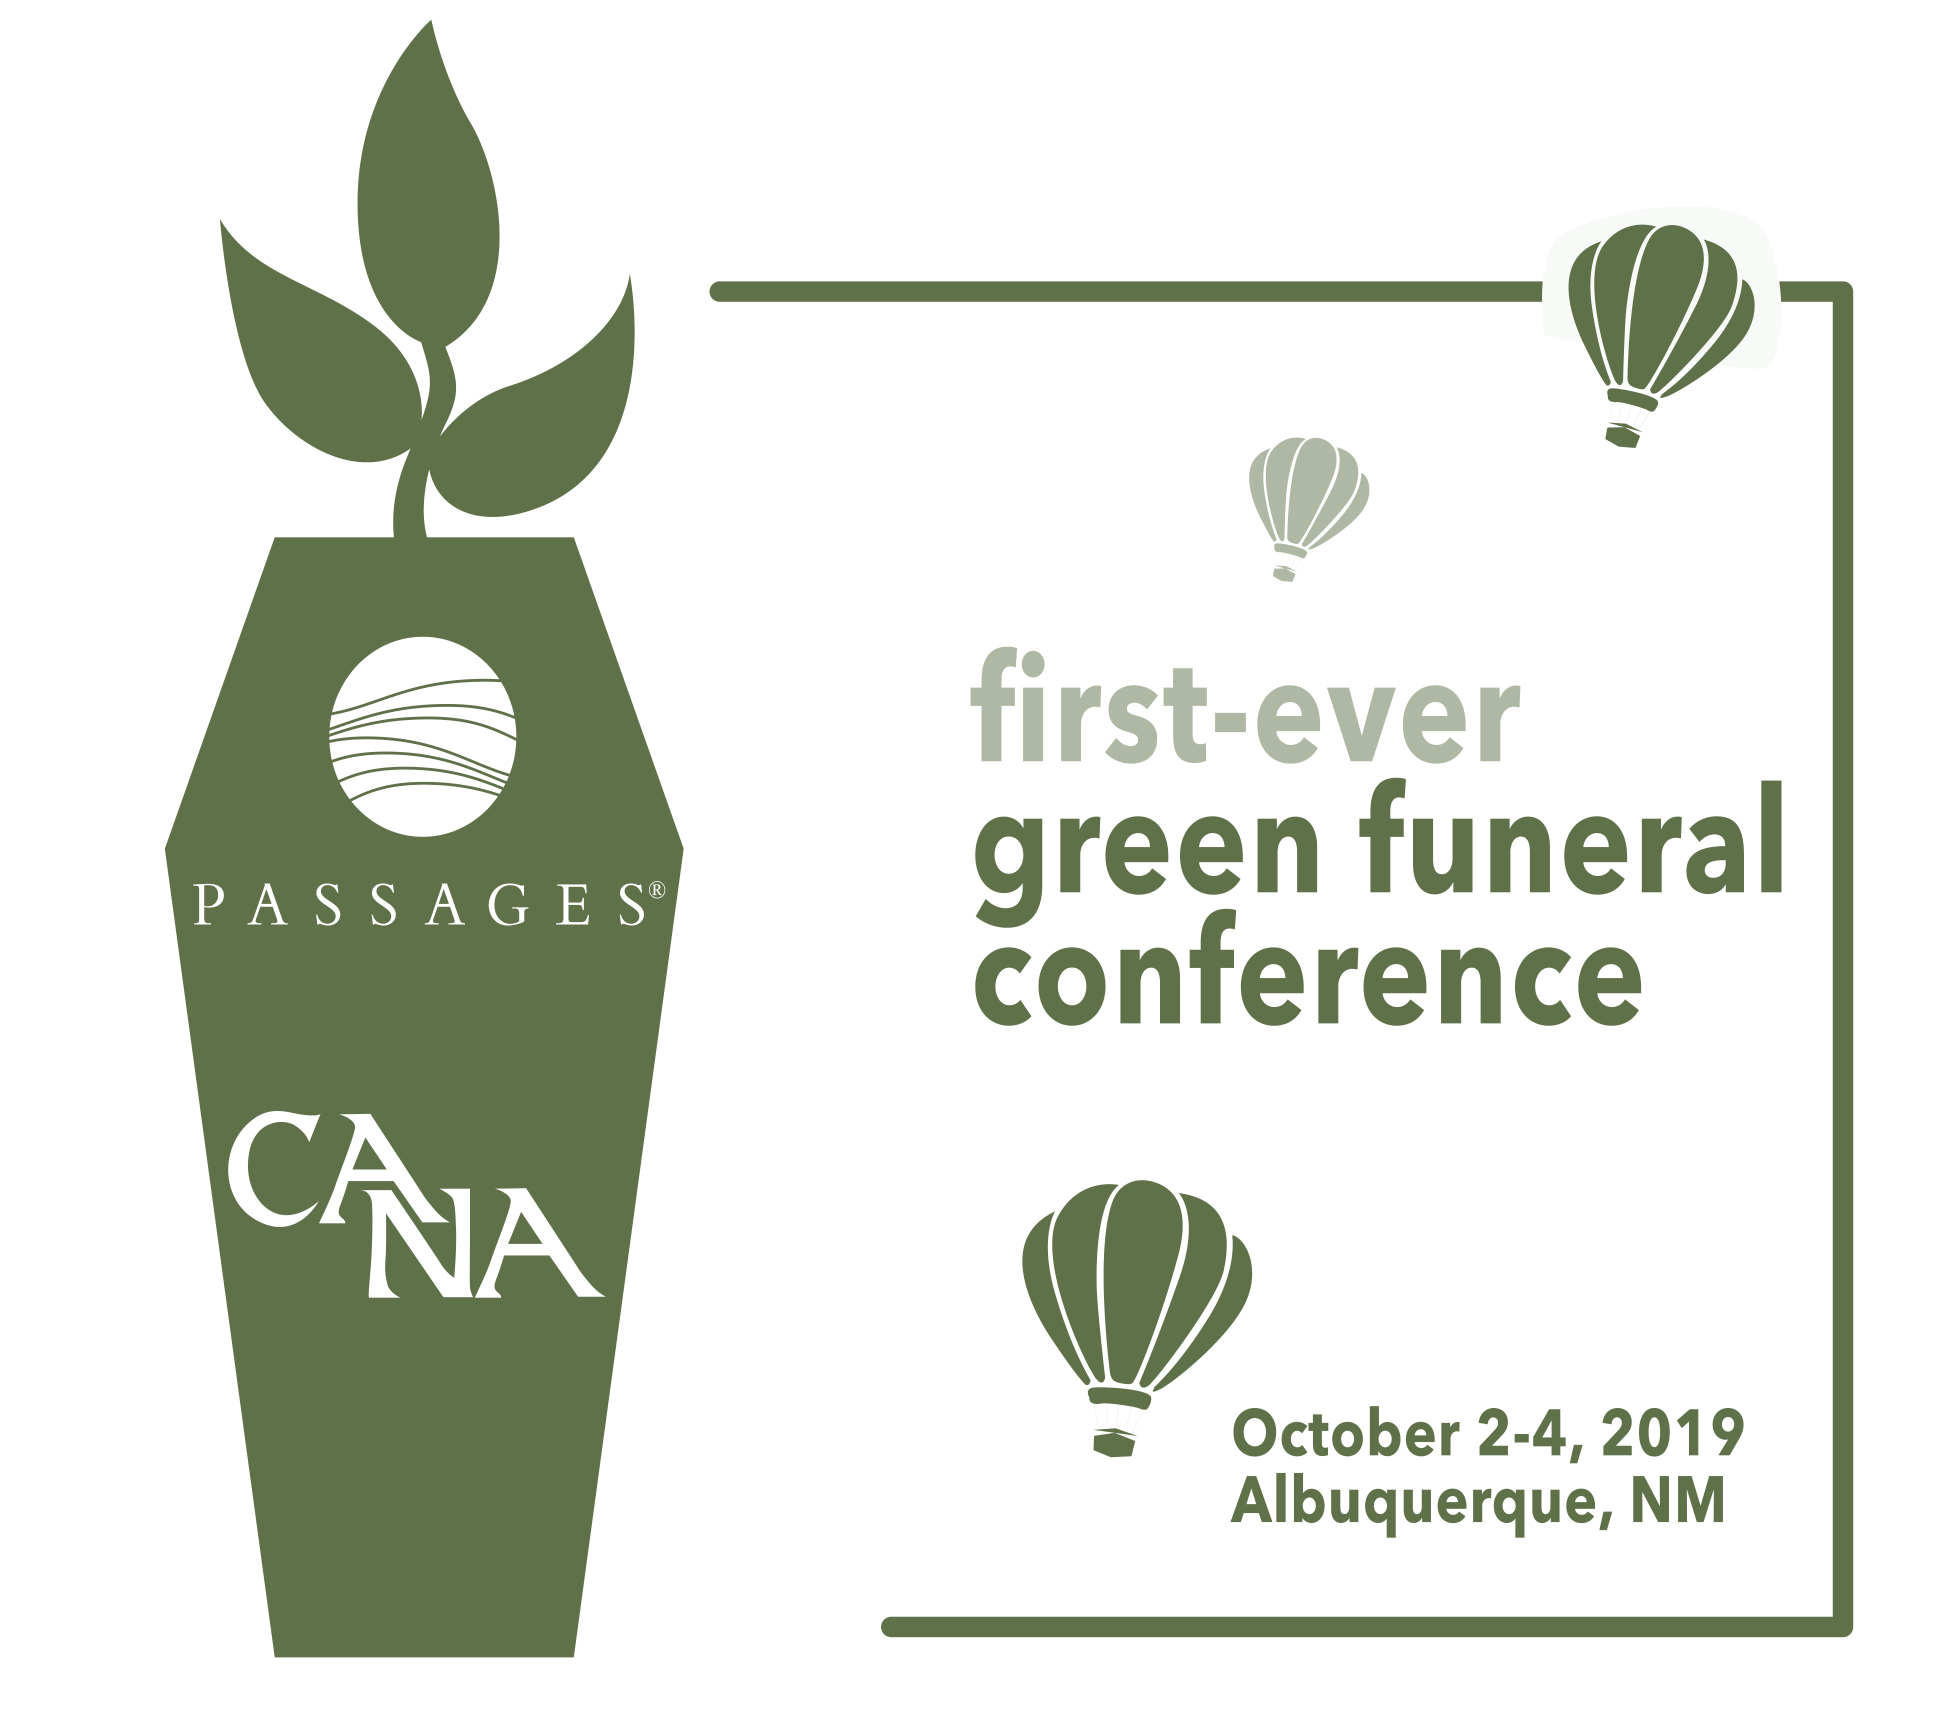 Passages International and CANA FirstEver Green Funeral Conference a